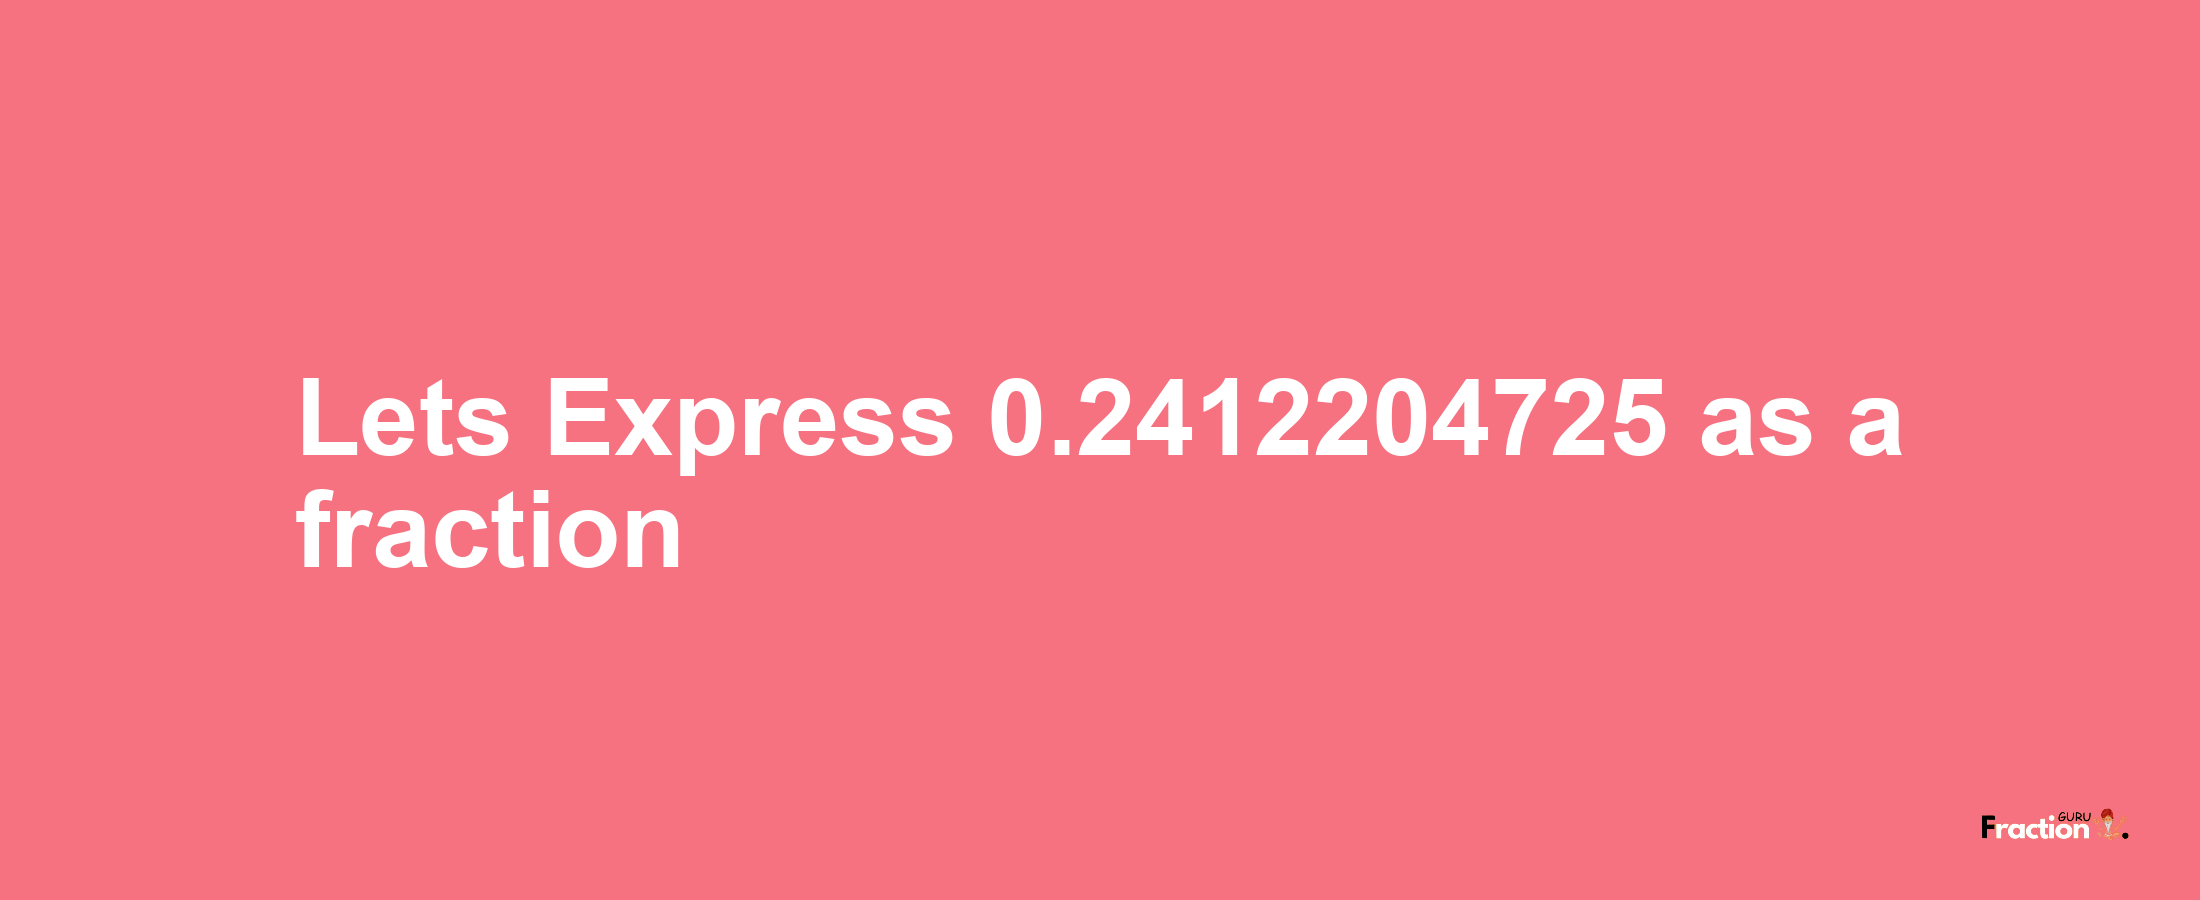 Lets Express 0.2412204725 as afraction